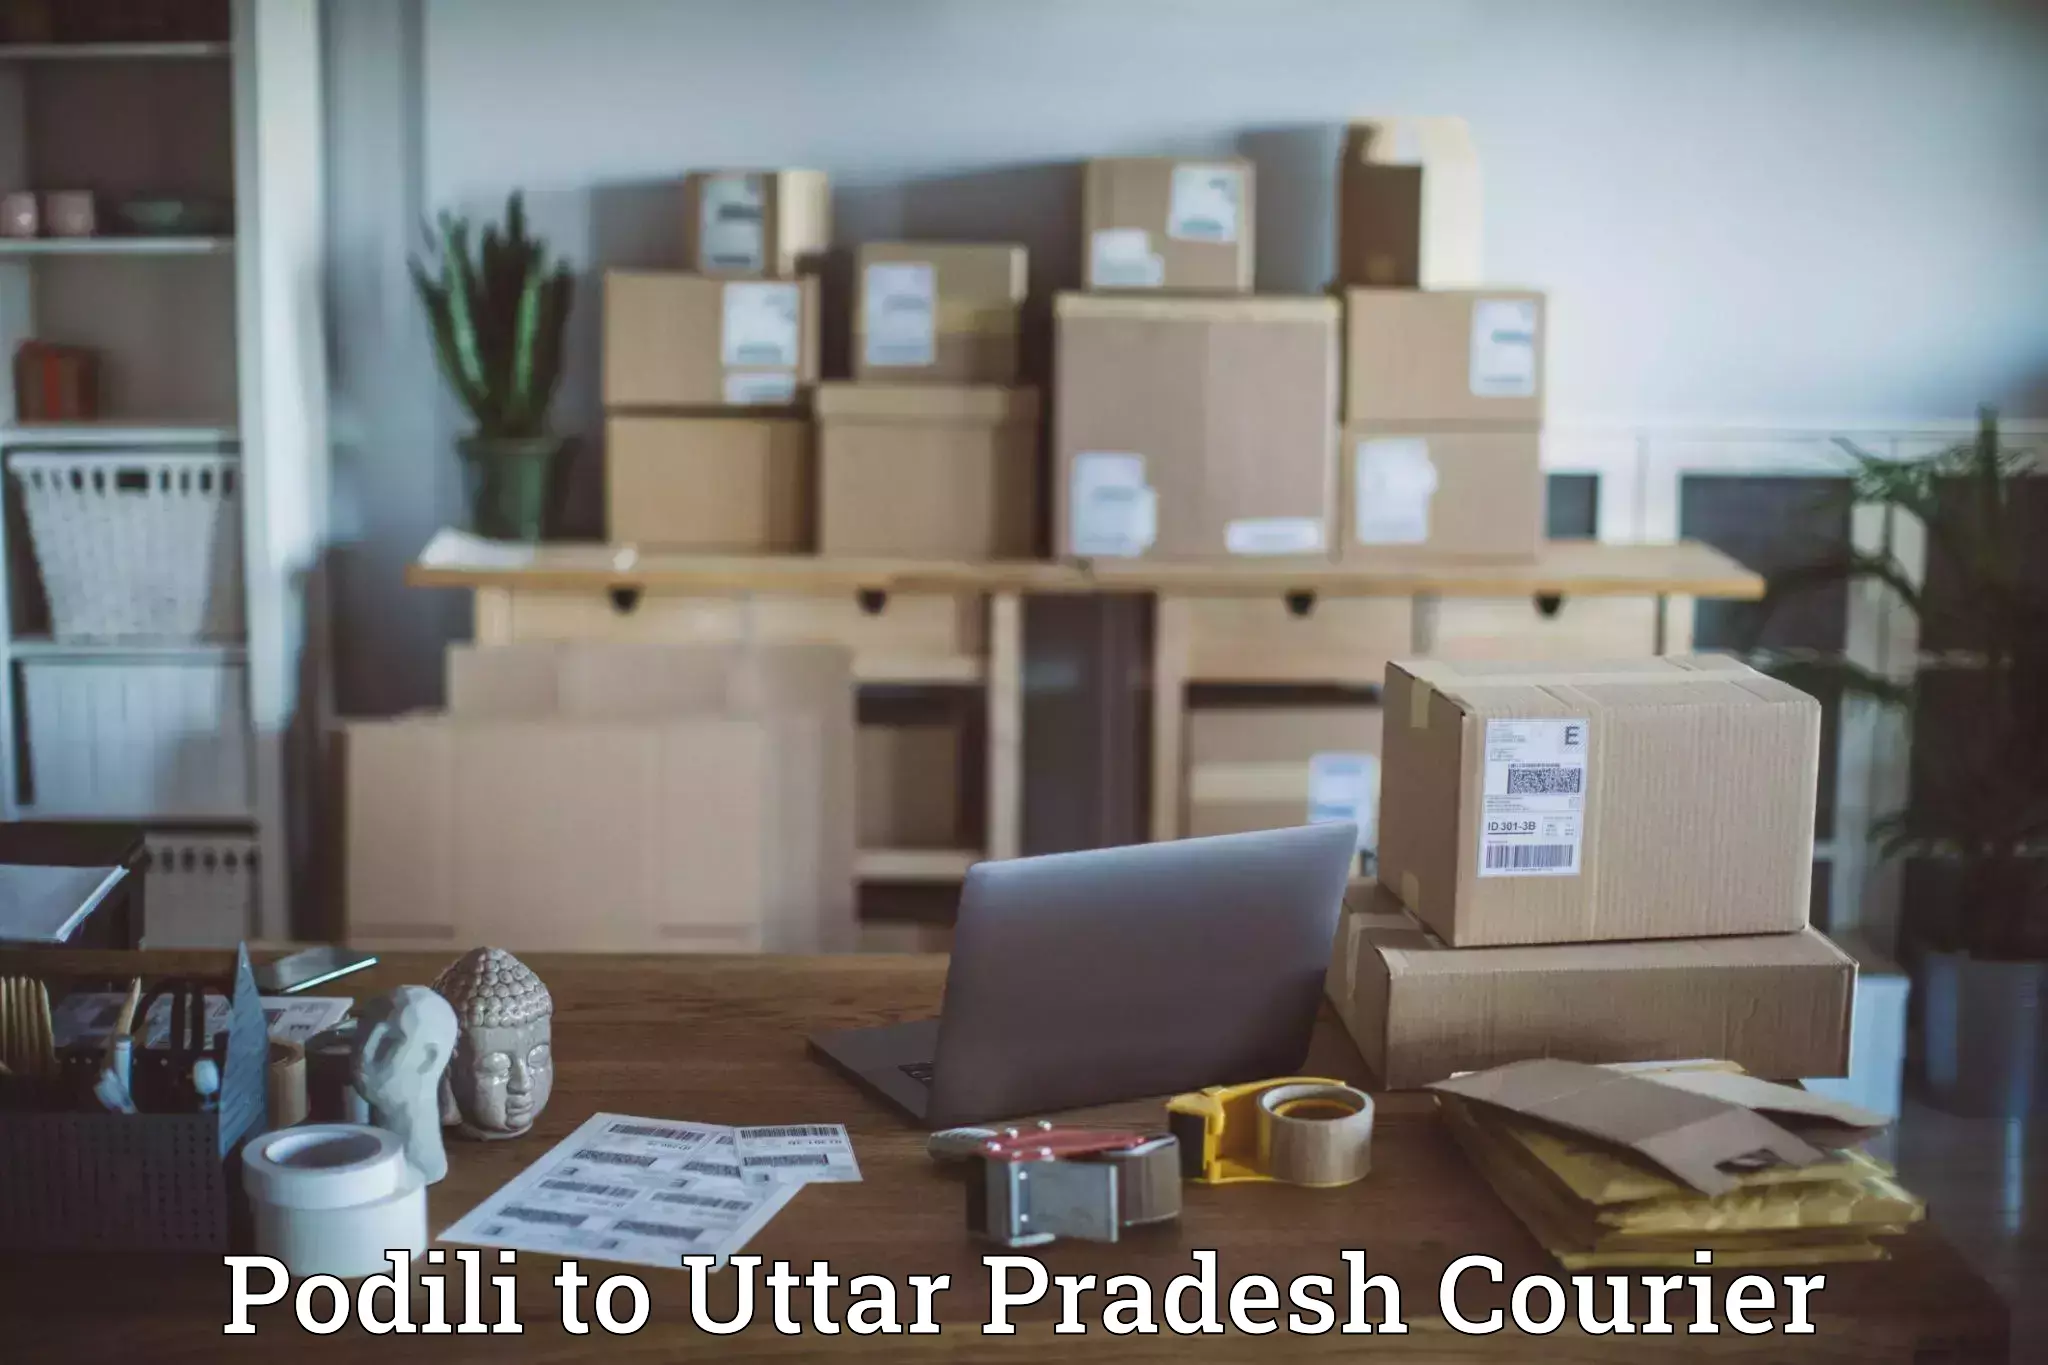 Comprehensive parcel tracking in Podili to Ghazipur